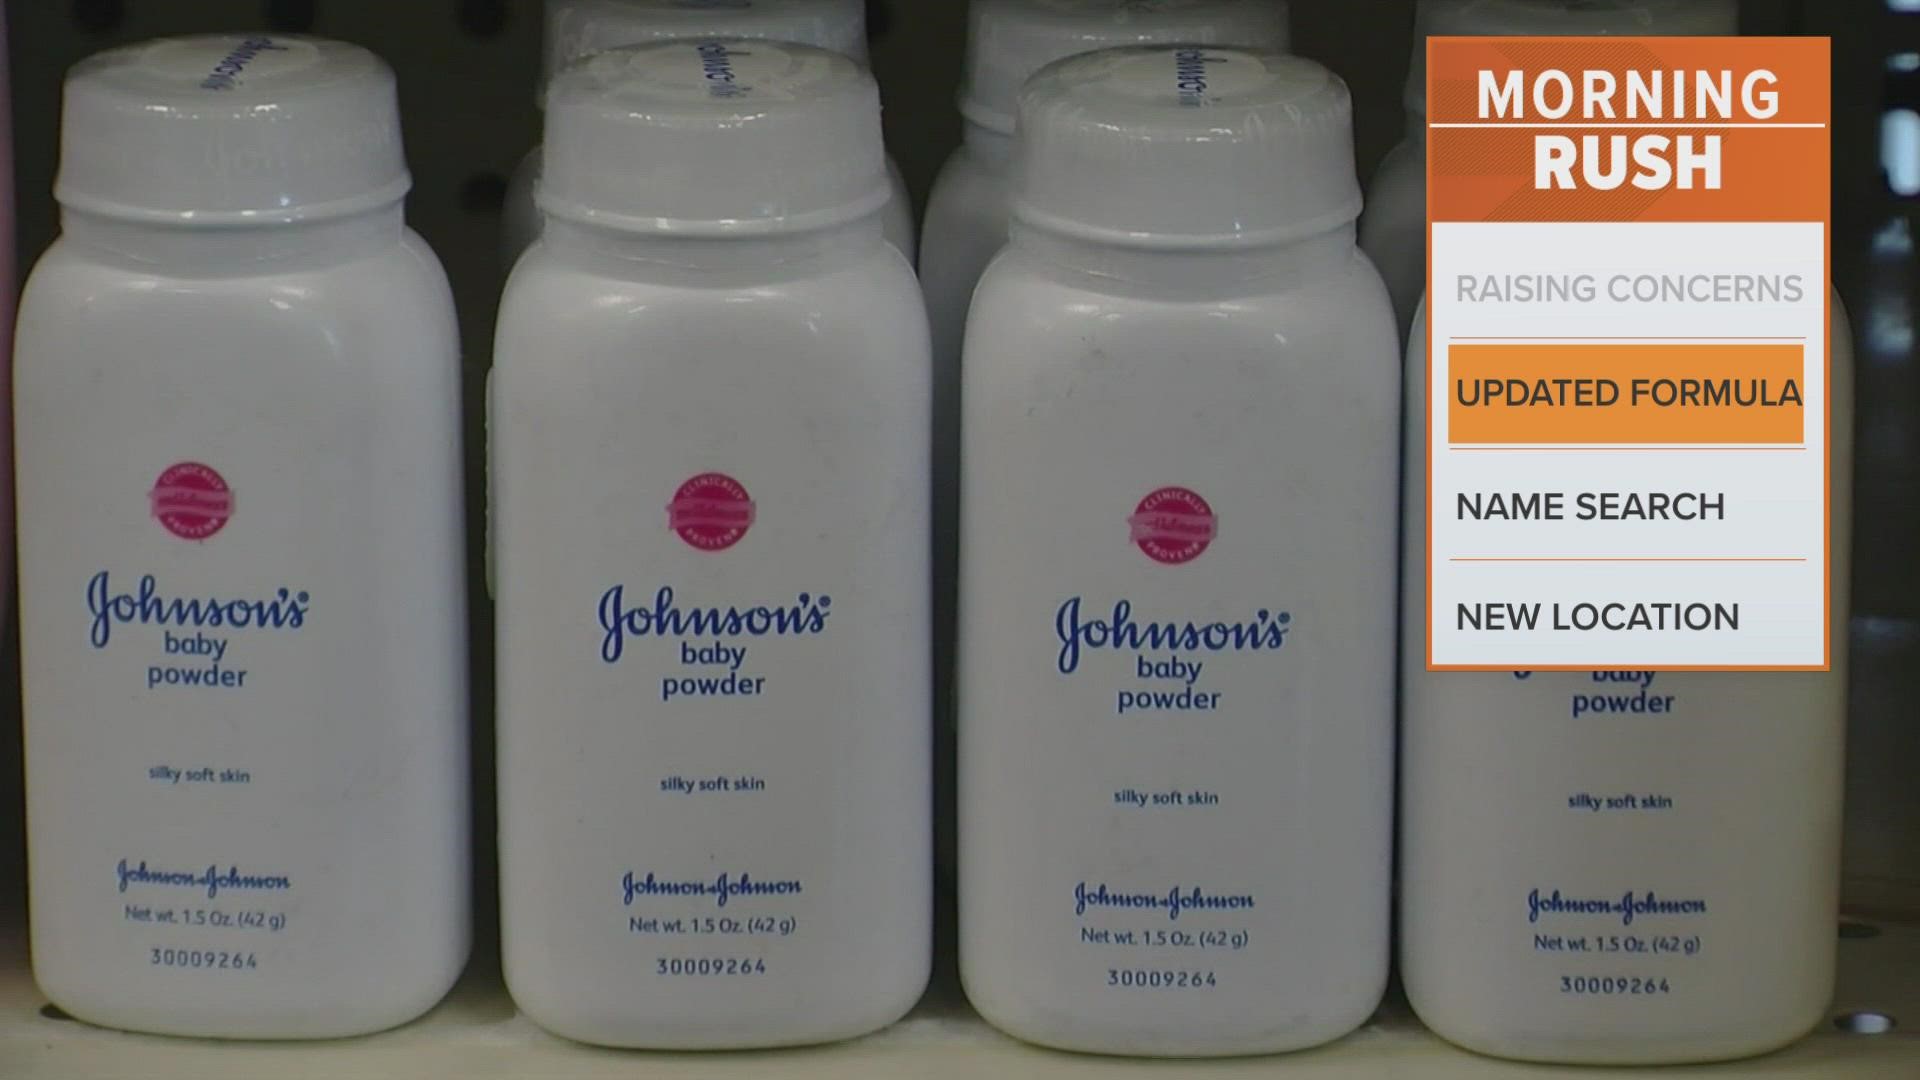 J&J insists the formula is safe, but it's faced multiple lawsuits for years.